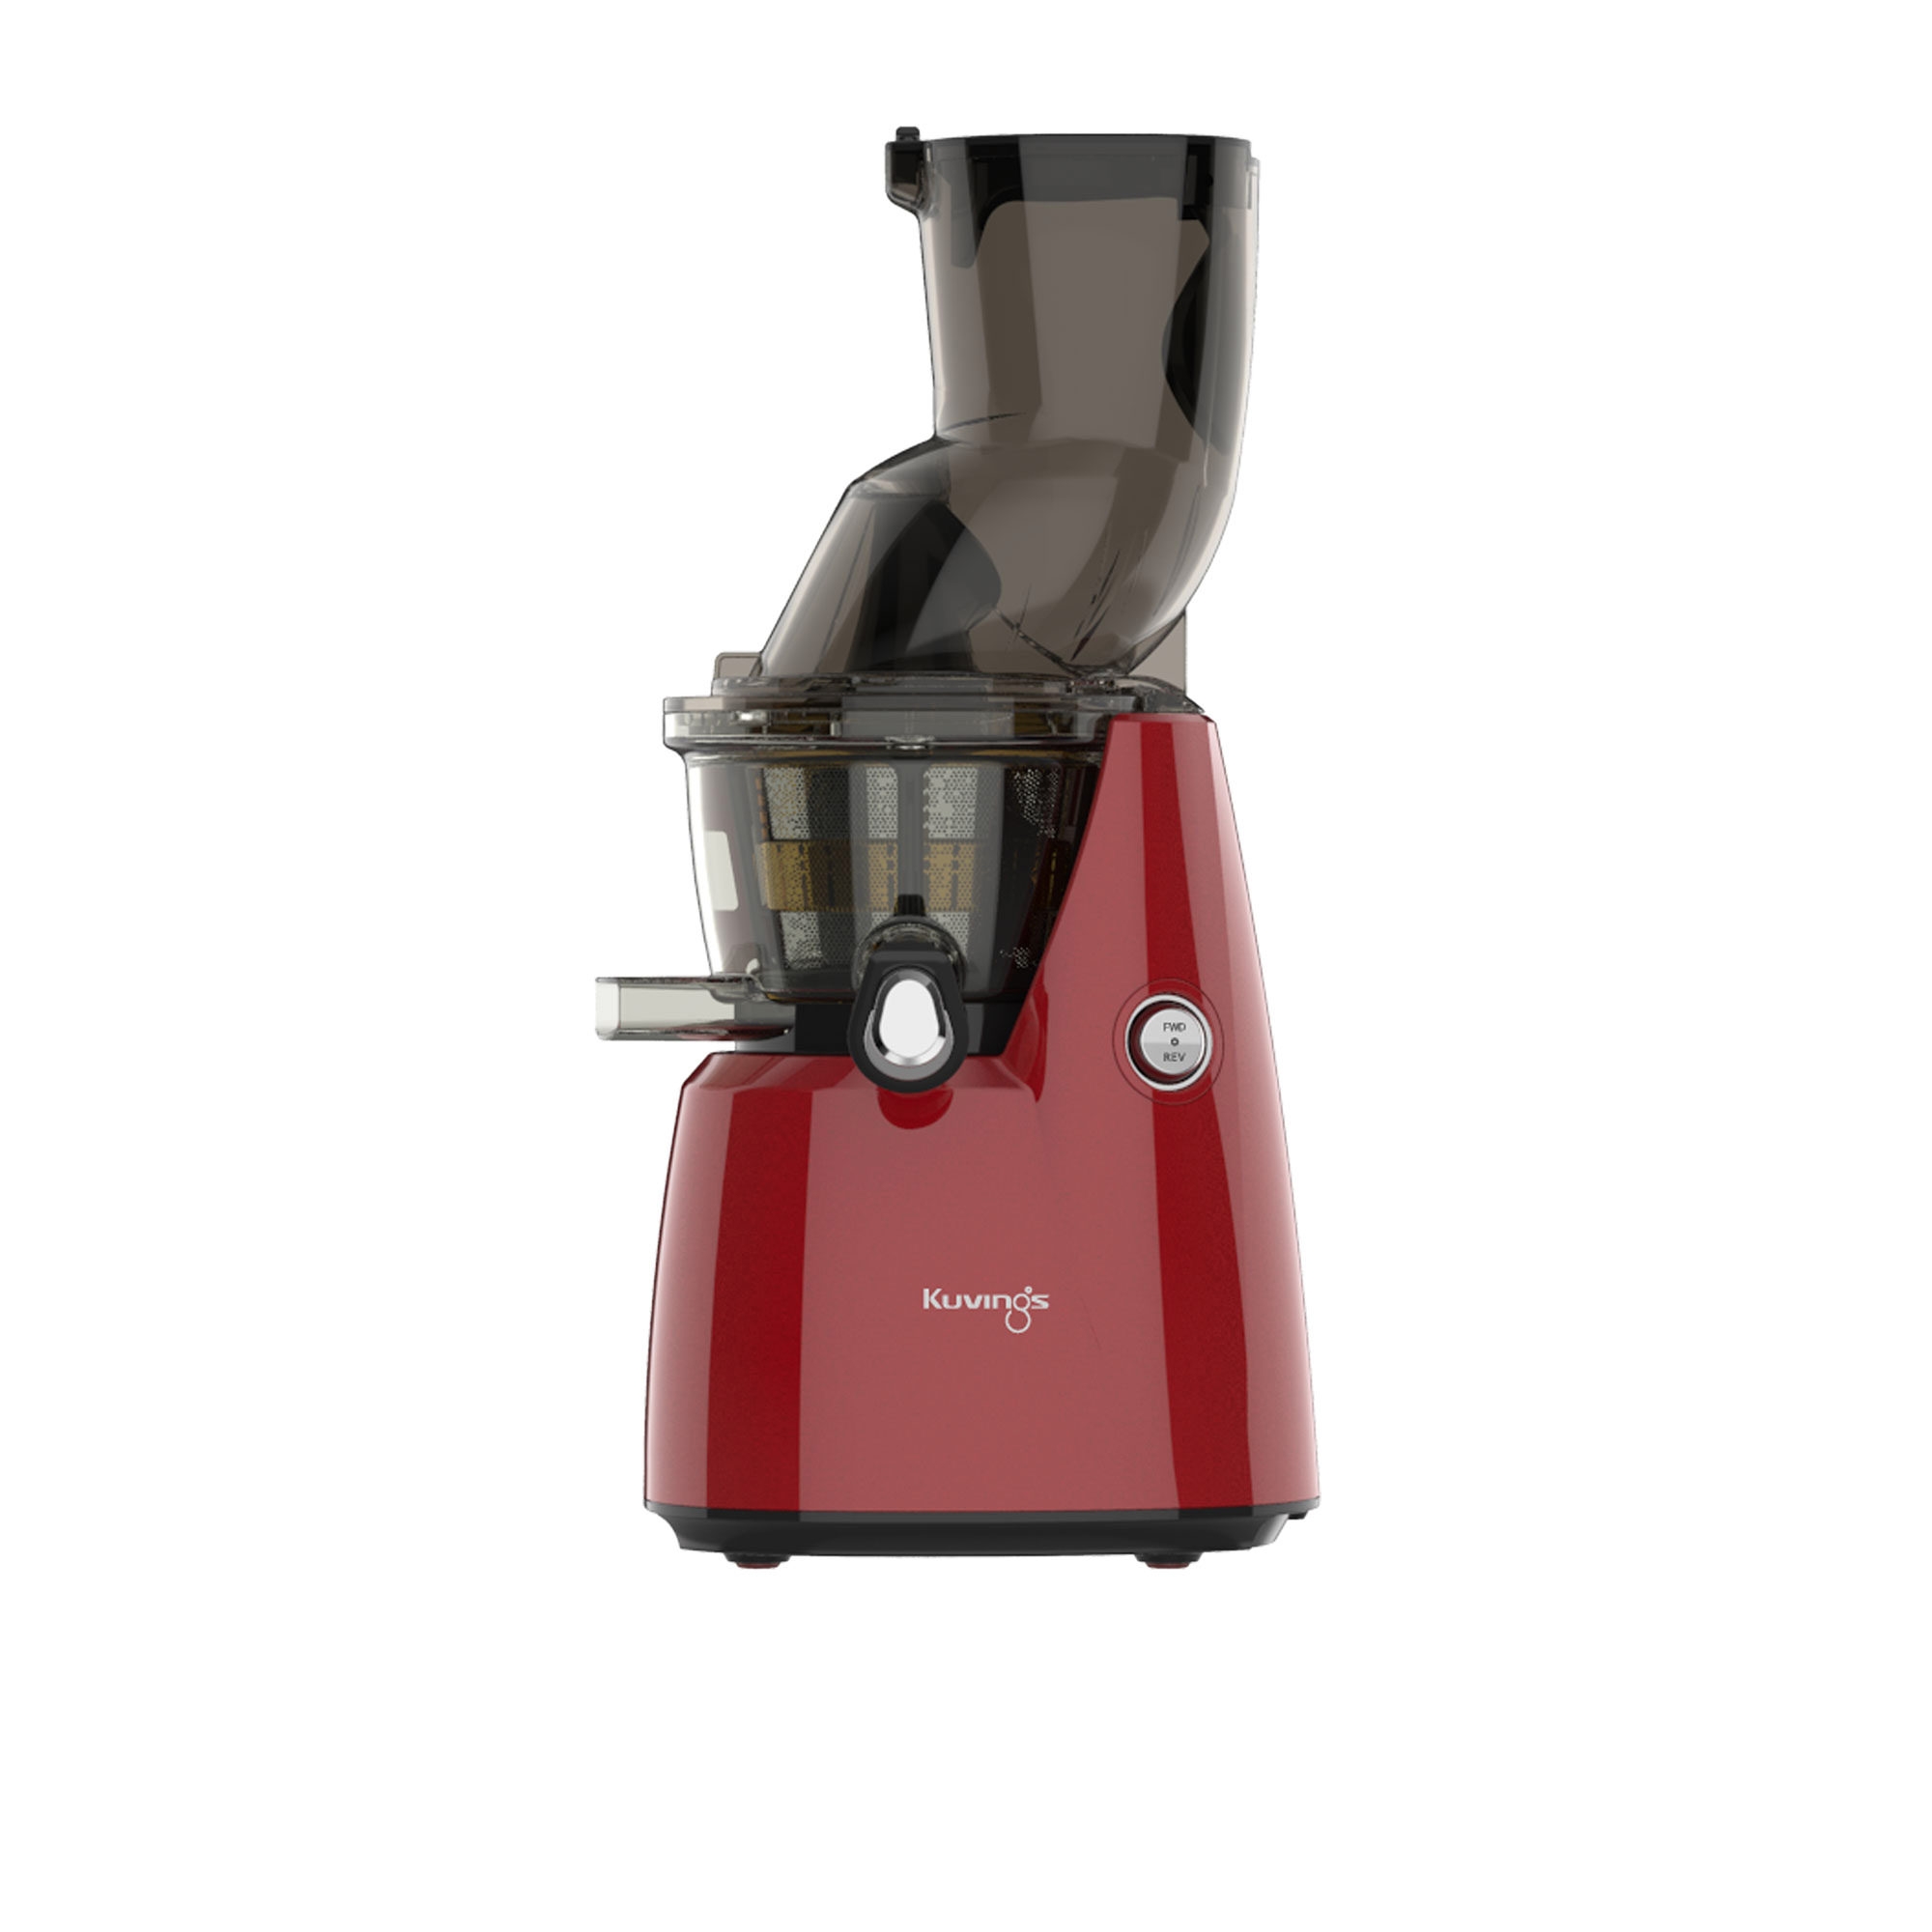 Kuvings E8000BG Professional Cold Press Juicer Red Image 1